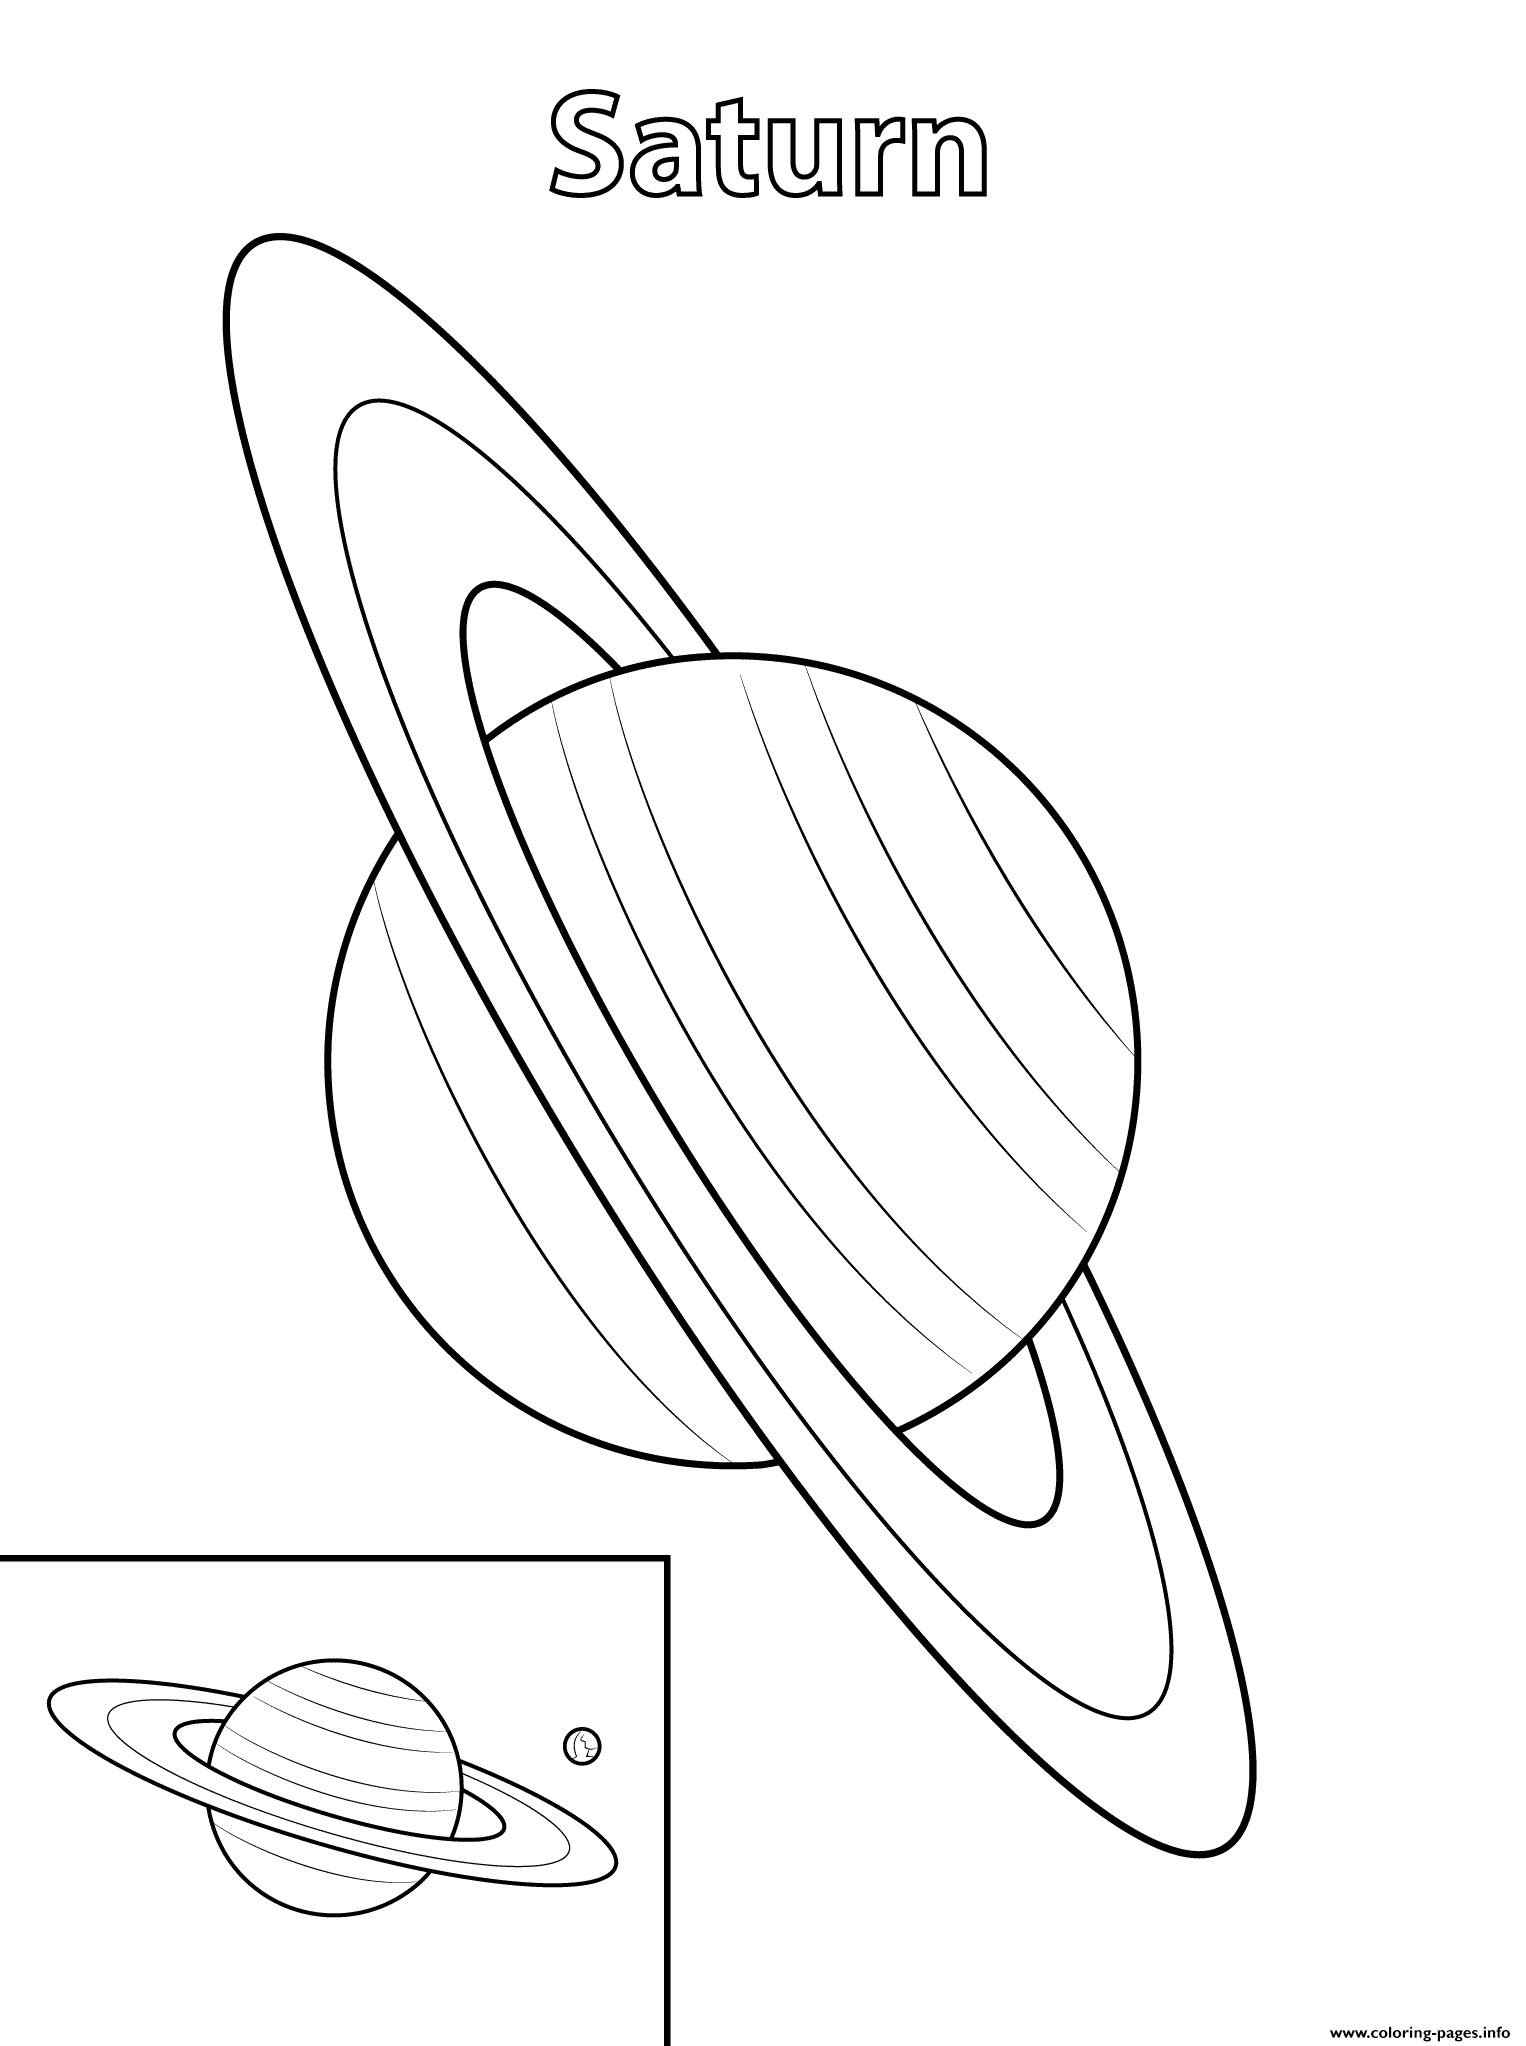 Saturn Planet Coloring Pages Printable